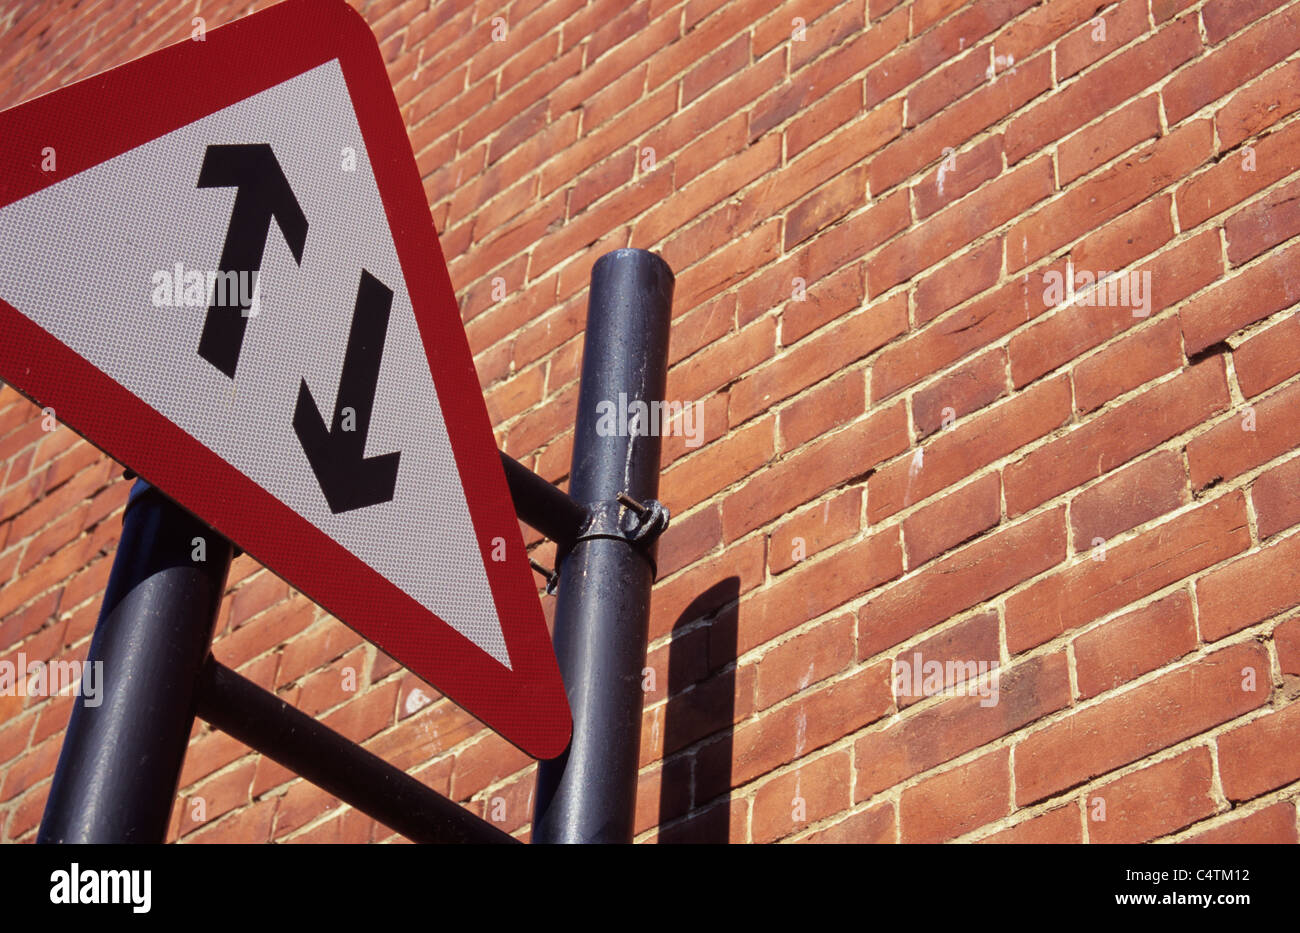 Red white and black triangular roadsign with opposing arrows showing Two-way traffic mounted on bracket next to brickwall Stock Photo